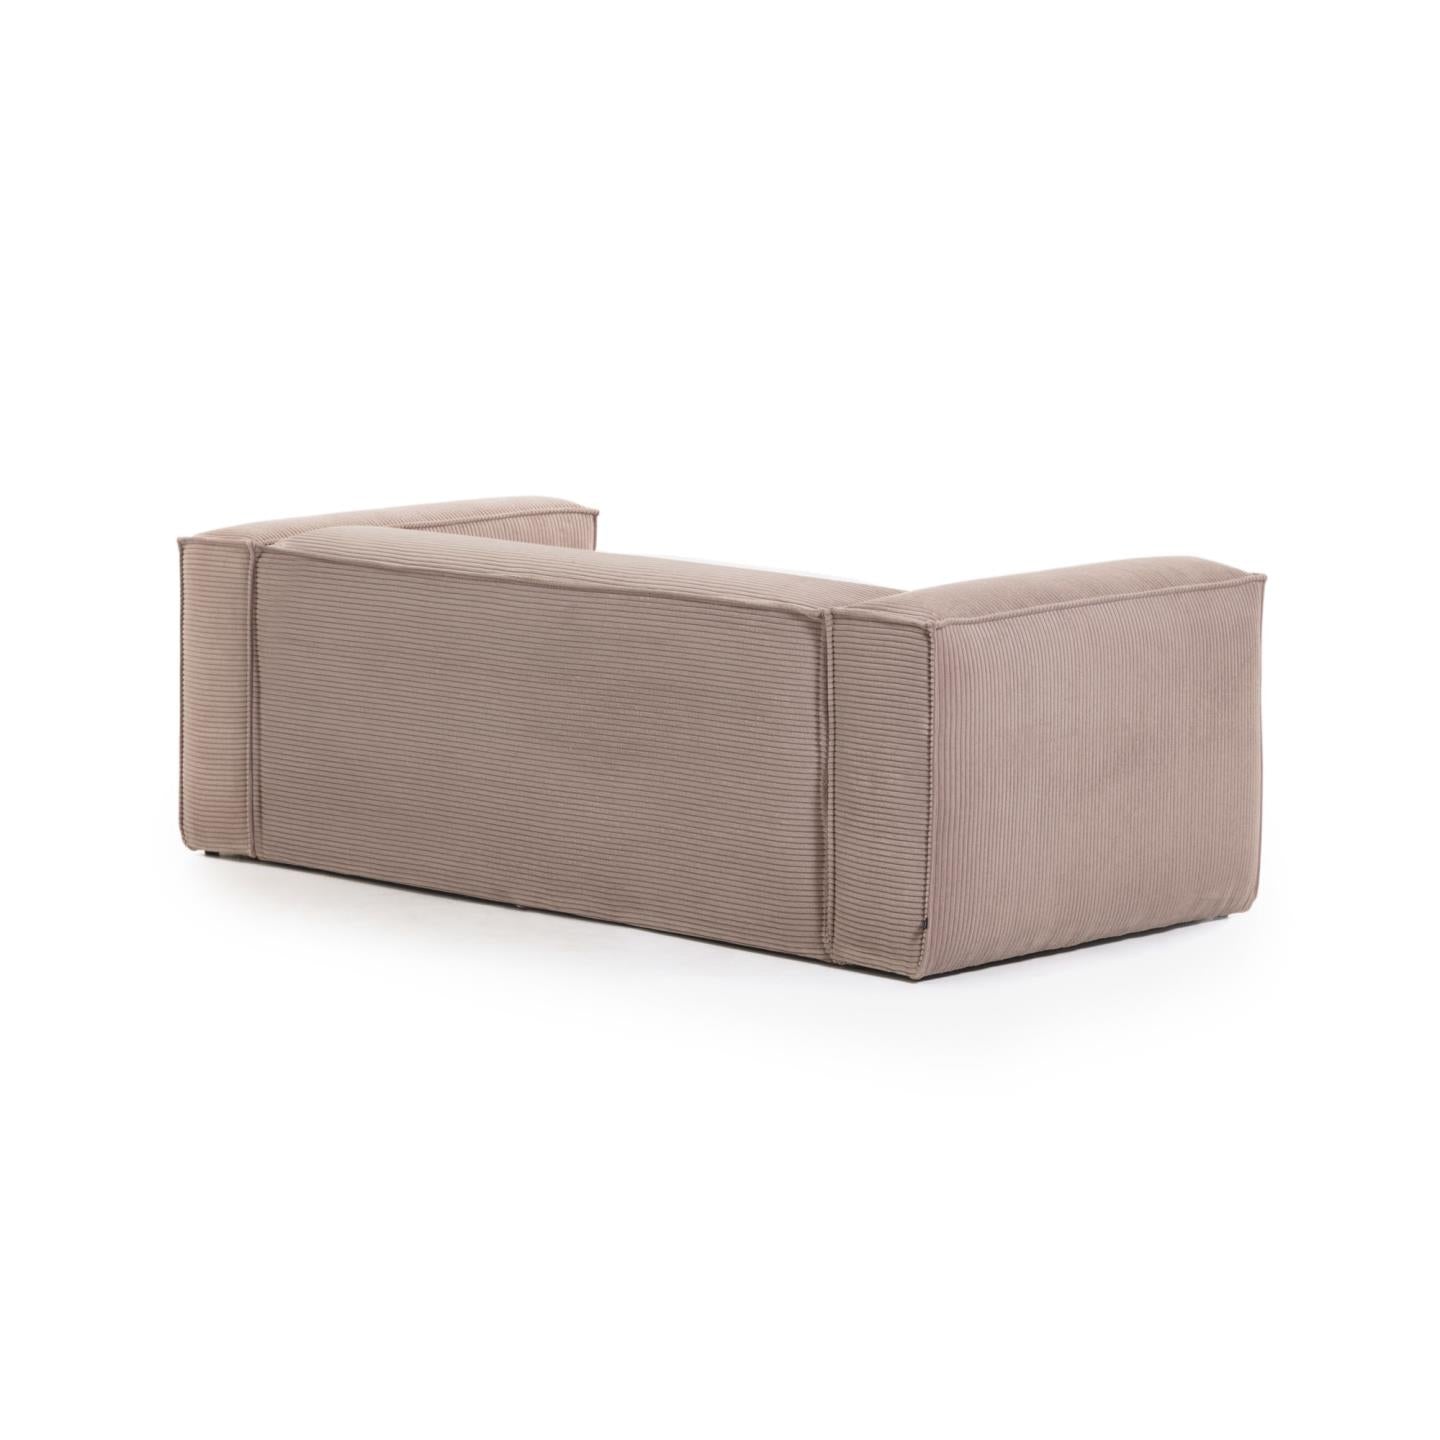 Blok 2 seater sofa with right side chaise longue in pink wide seam corduroy, 240 cm